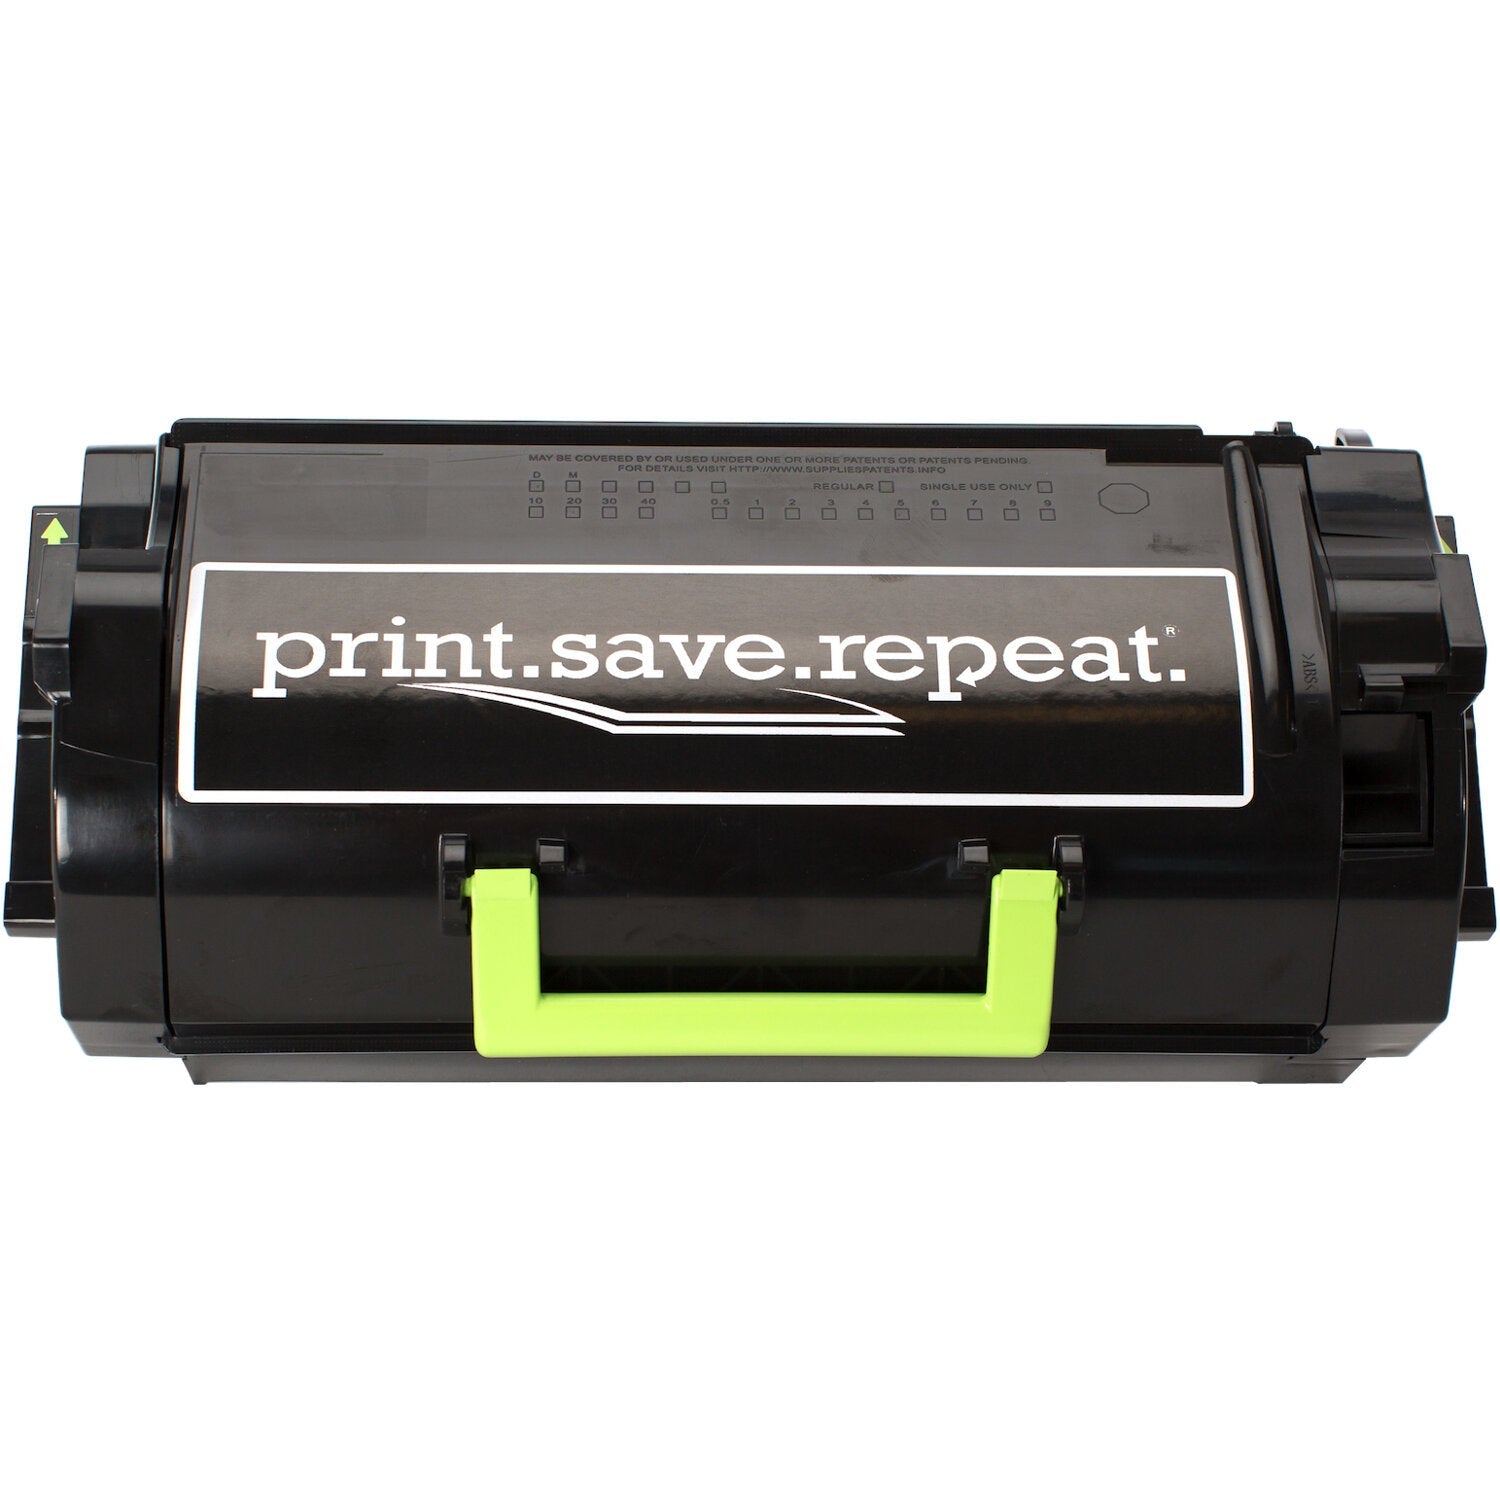 Print.Save.Repeat. Lexmark 620HG High Yield Remanufactured Toner Cartridge (62D0H0G) for MX710, MX711, MX810, MX811, MX812 [25,000 Pages]